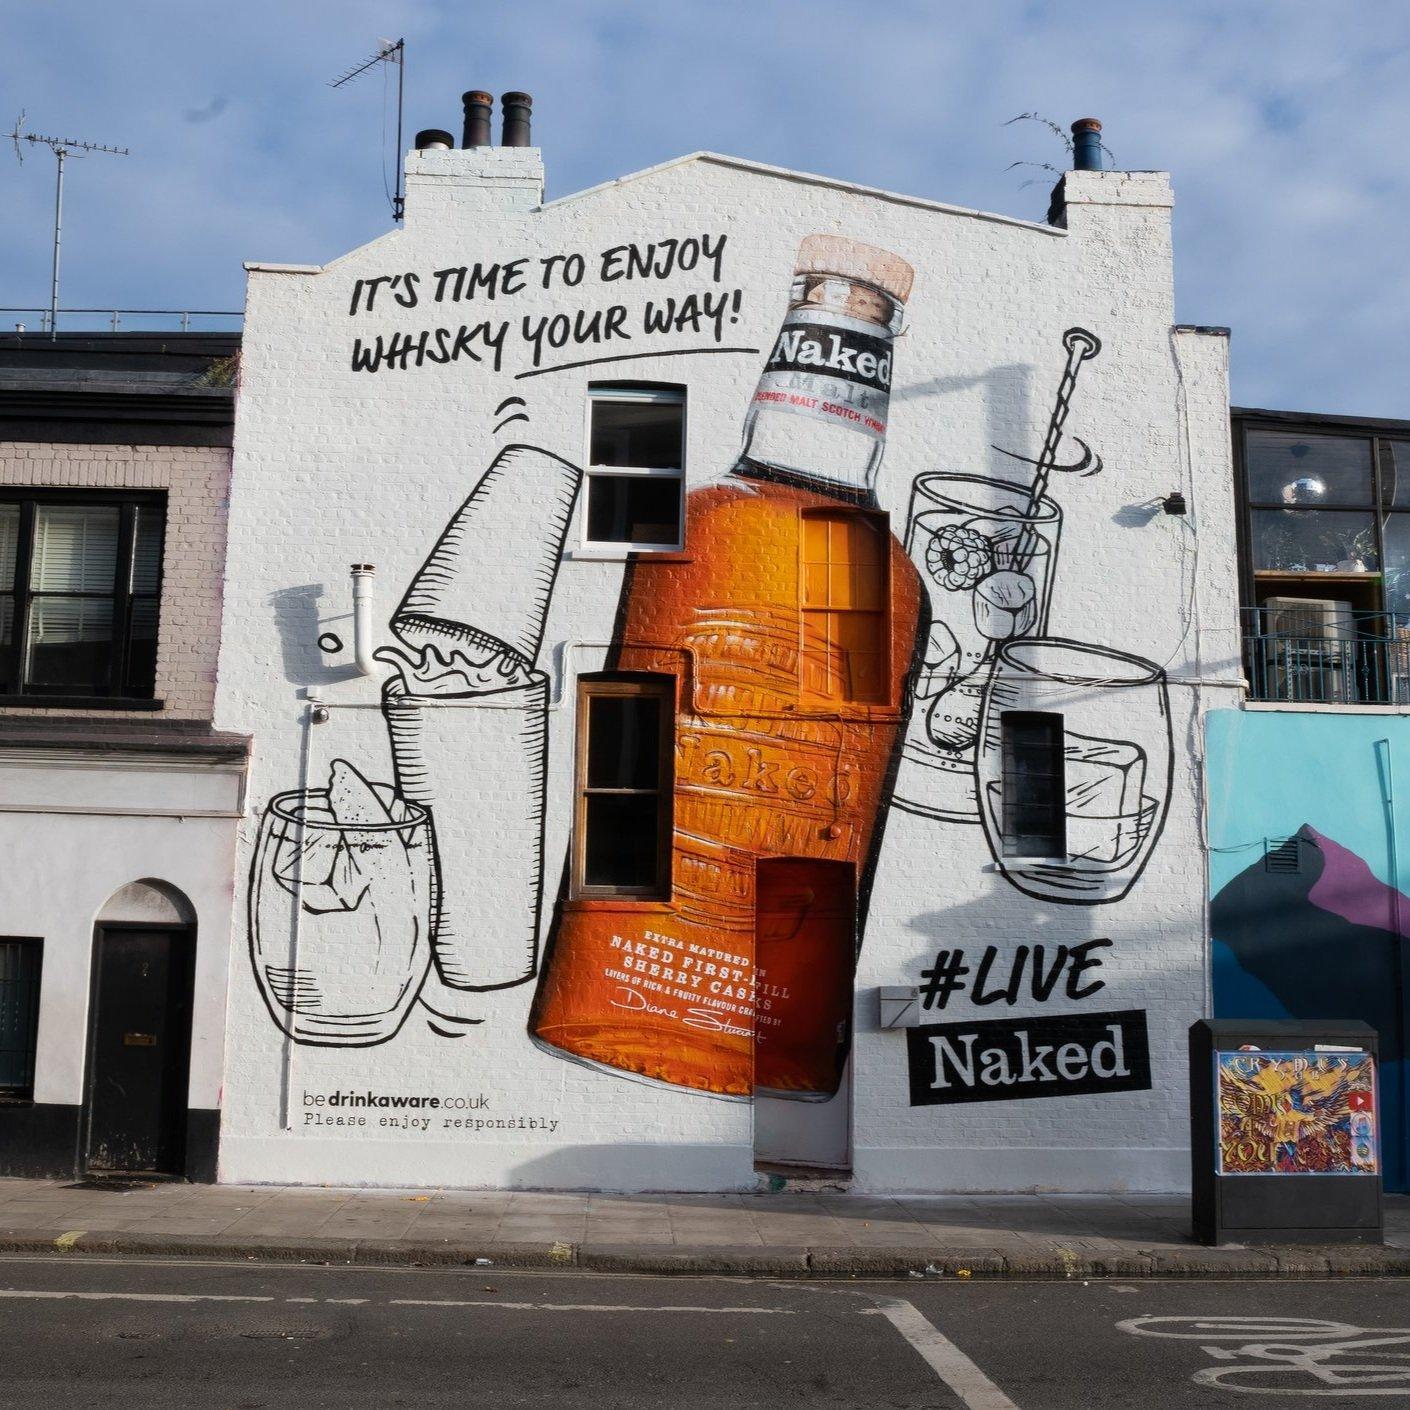 A building with a Naked Whisky Ad painted on the side.